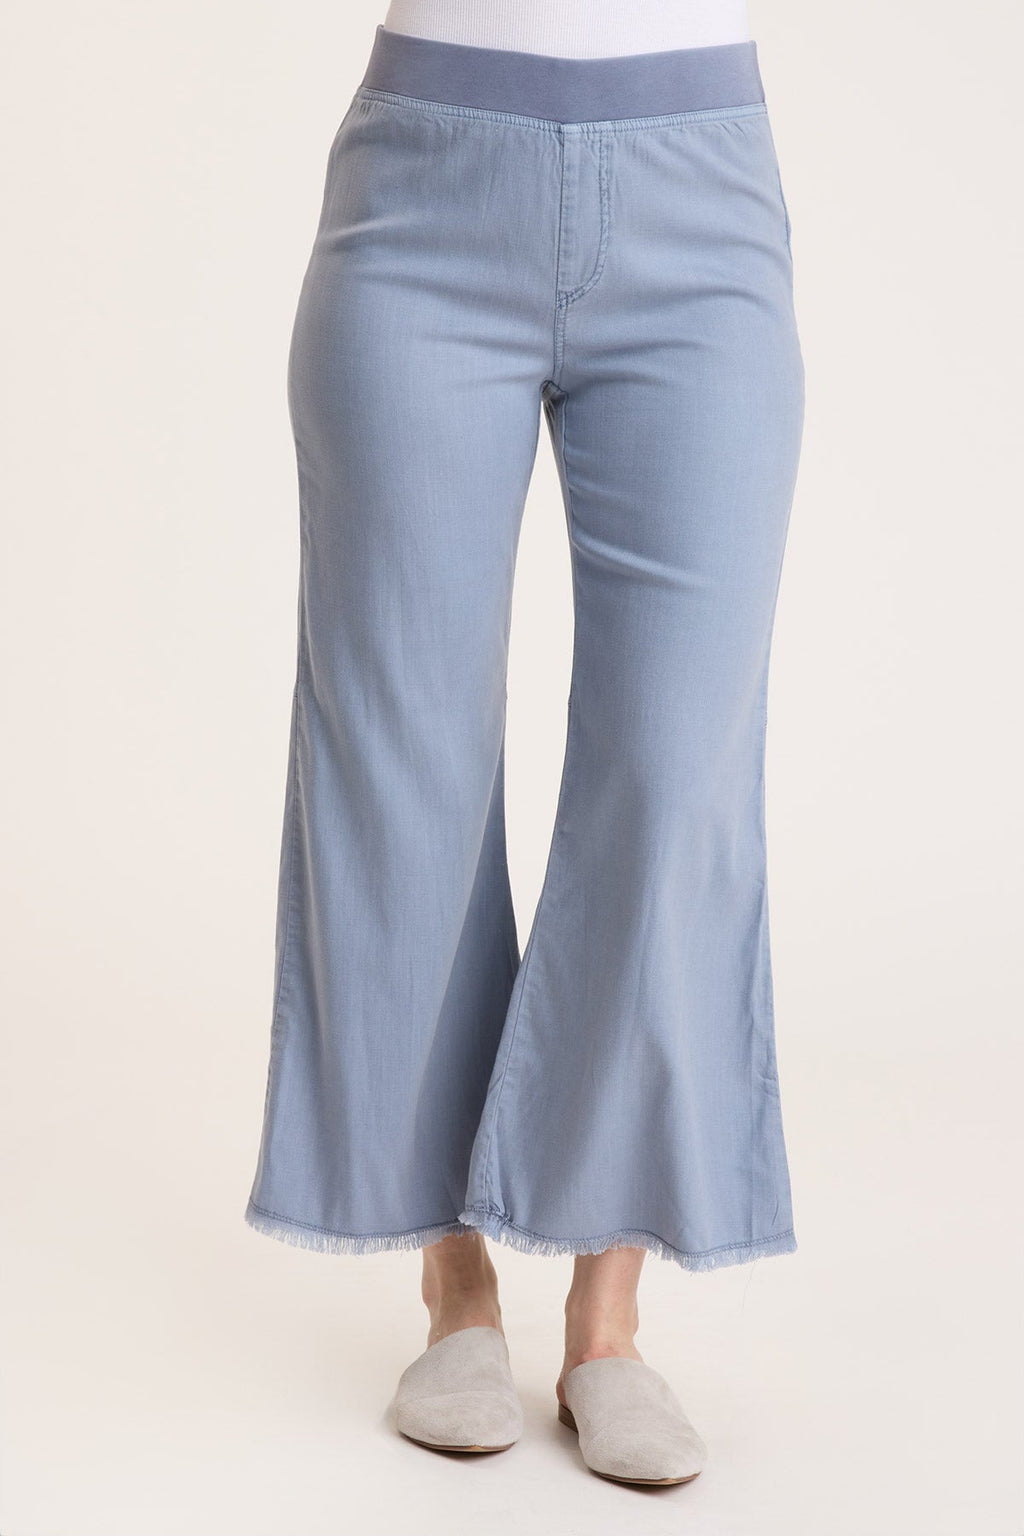 Hydra Flare Pant in Riverdale Pigment – XCVI